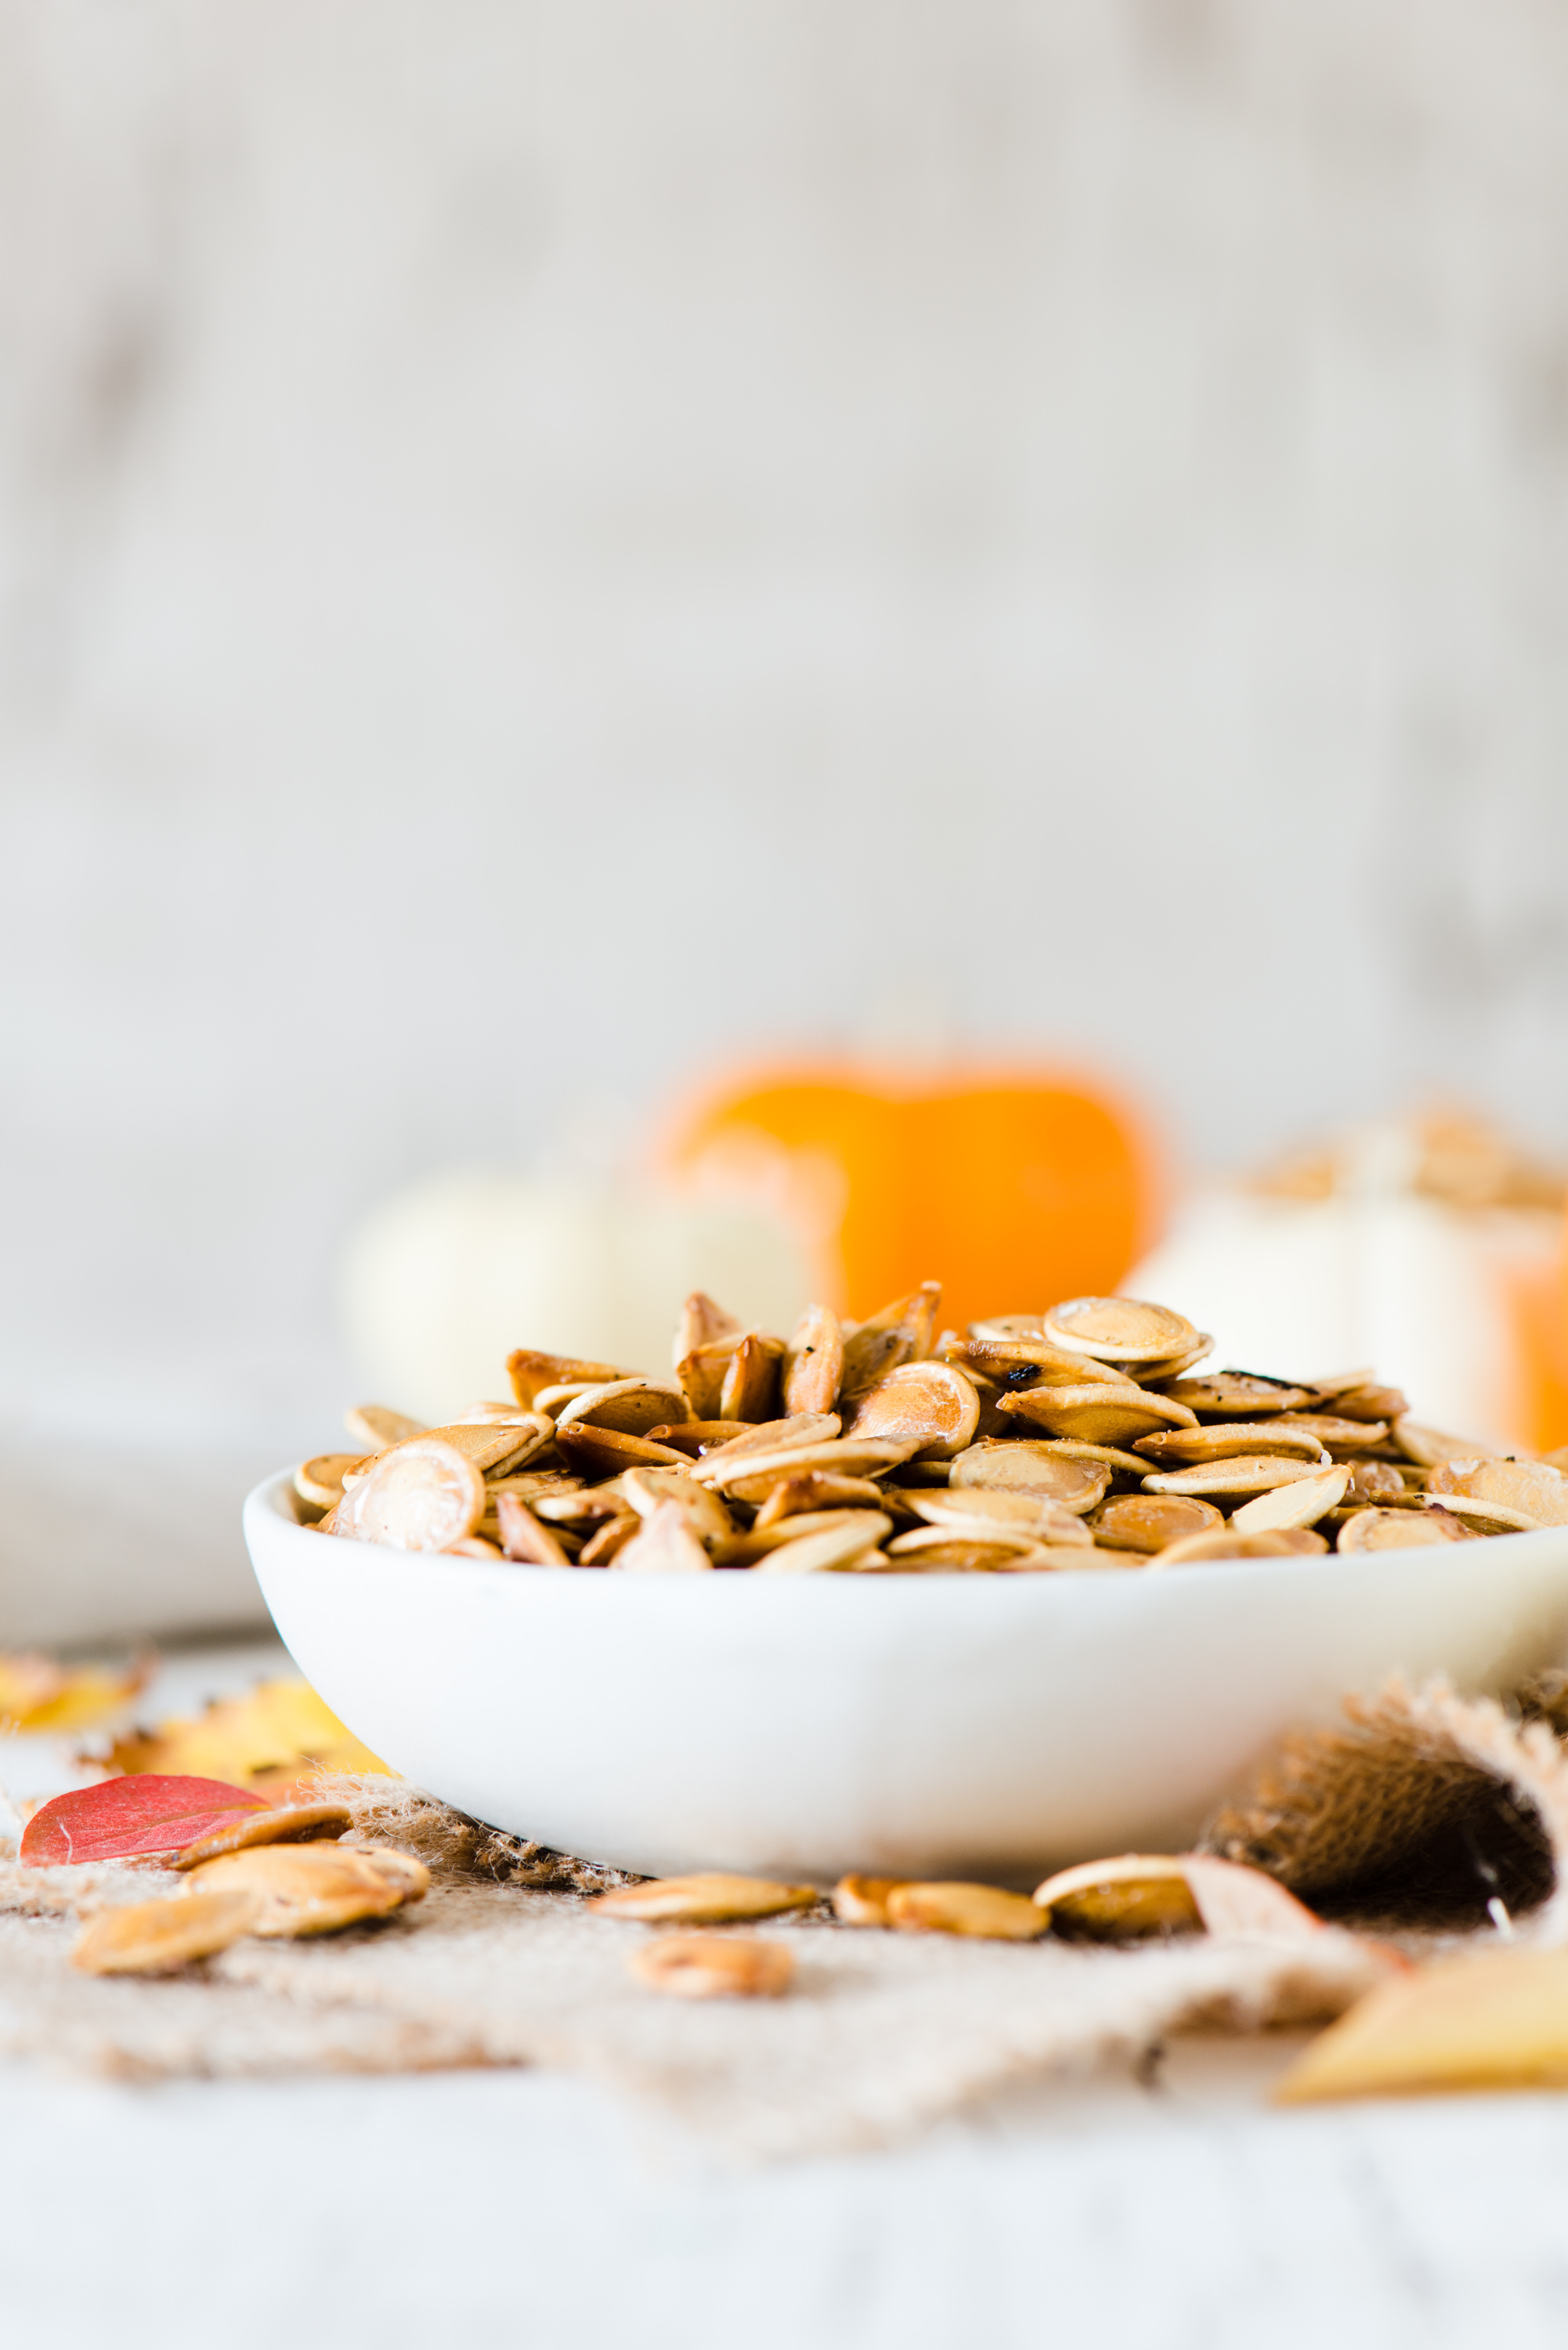 Roasted Pumpkin Seeds - One of the best parts of pumpkin!